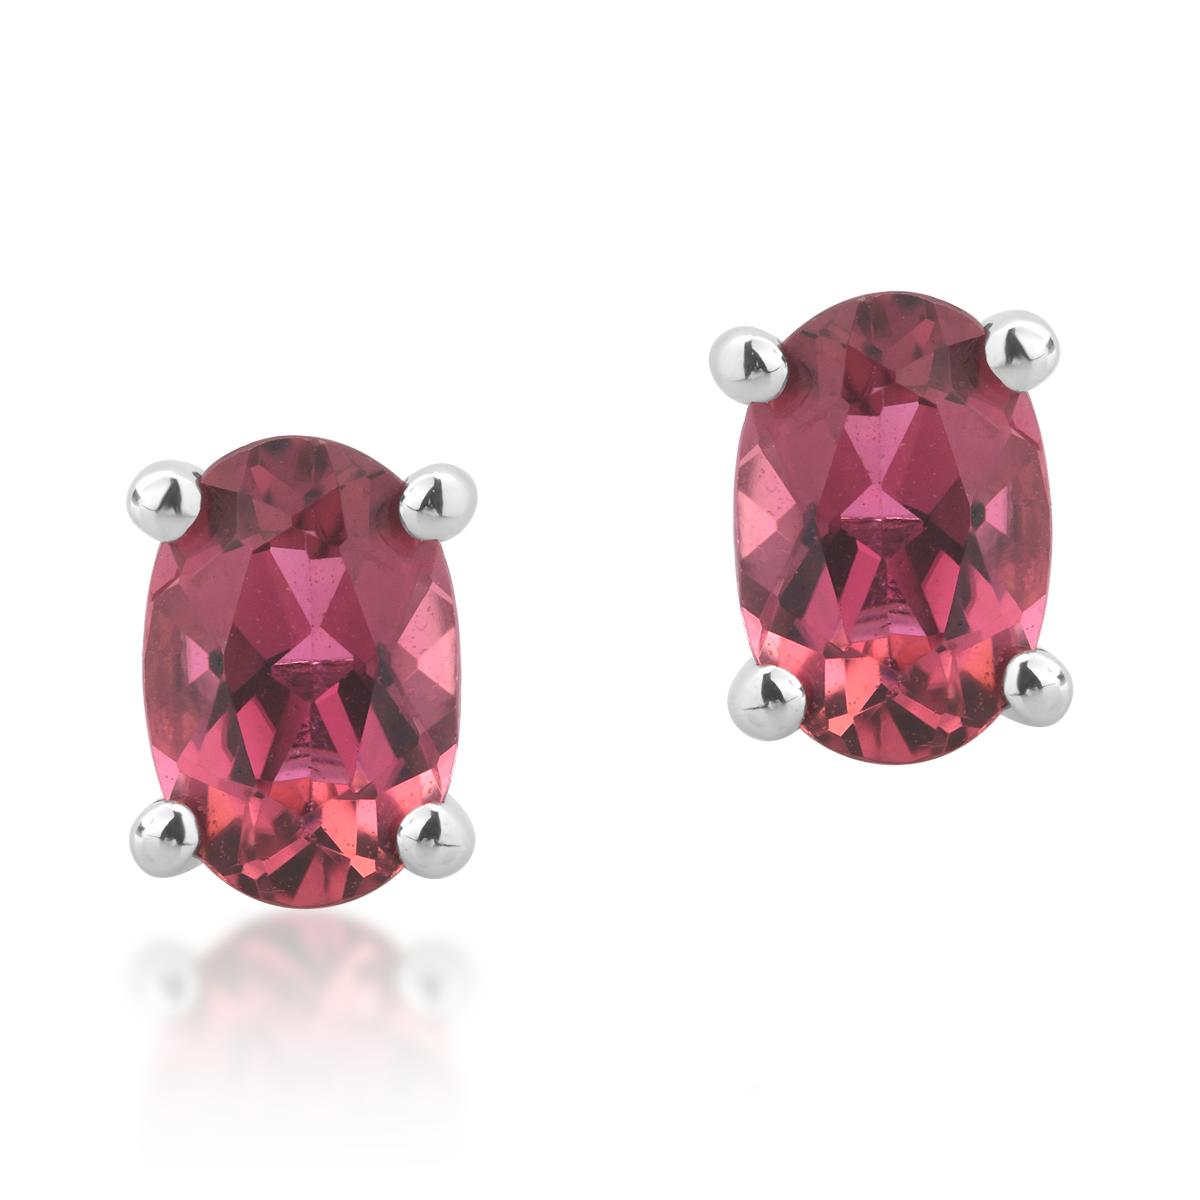 18K white gold earrings with 0.76ct rose tourmalines